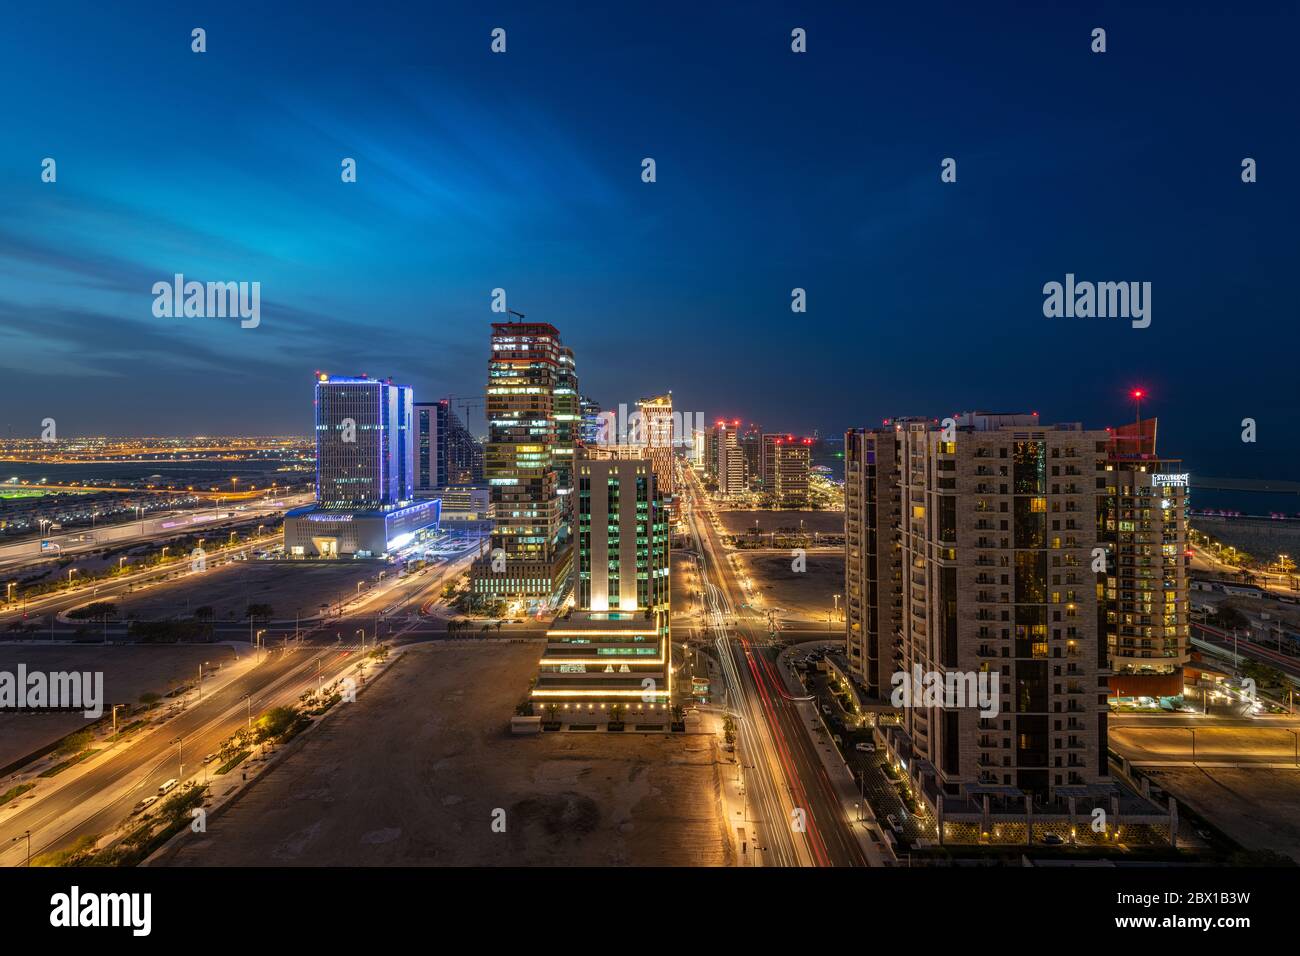 Beautiful City Scape Of Lusail City Night View Of Lusail City Stock Photo Alamy